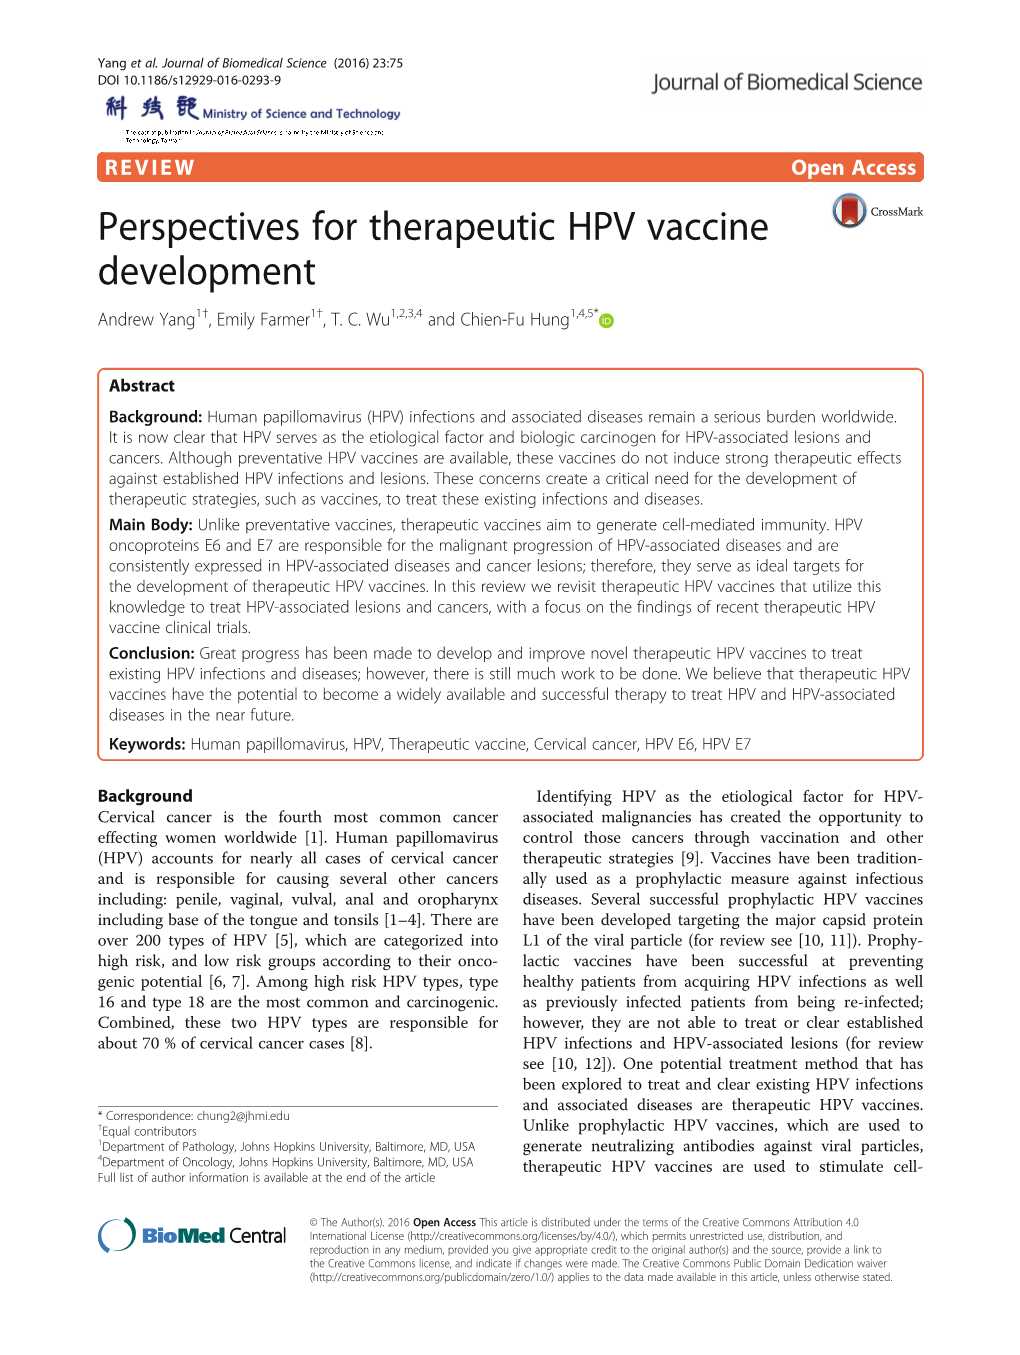 Perspectives for Therapeutic HPV Vaccine Development Andrew Yang1†, Emily Farmer1†,T.C.Wu1,2,3,4 and Chien-Fu Hung1,4,5*